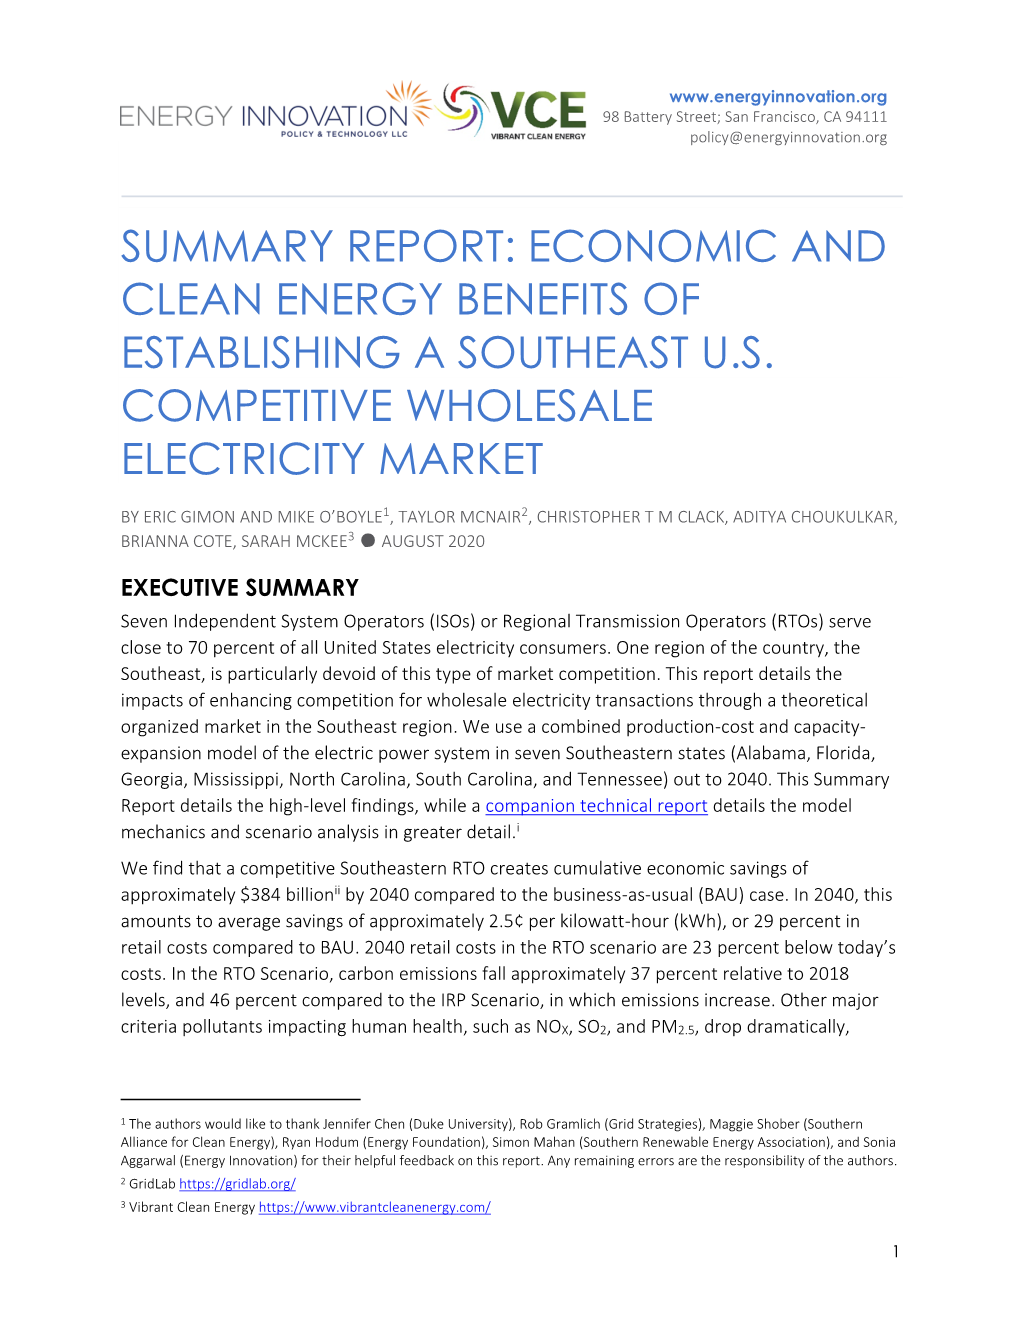 Summary Report: Economic and Clean Energy Benefits of Establishing a Southeast U.S. Competitive Wholesale Electricity Market